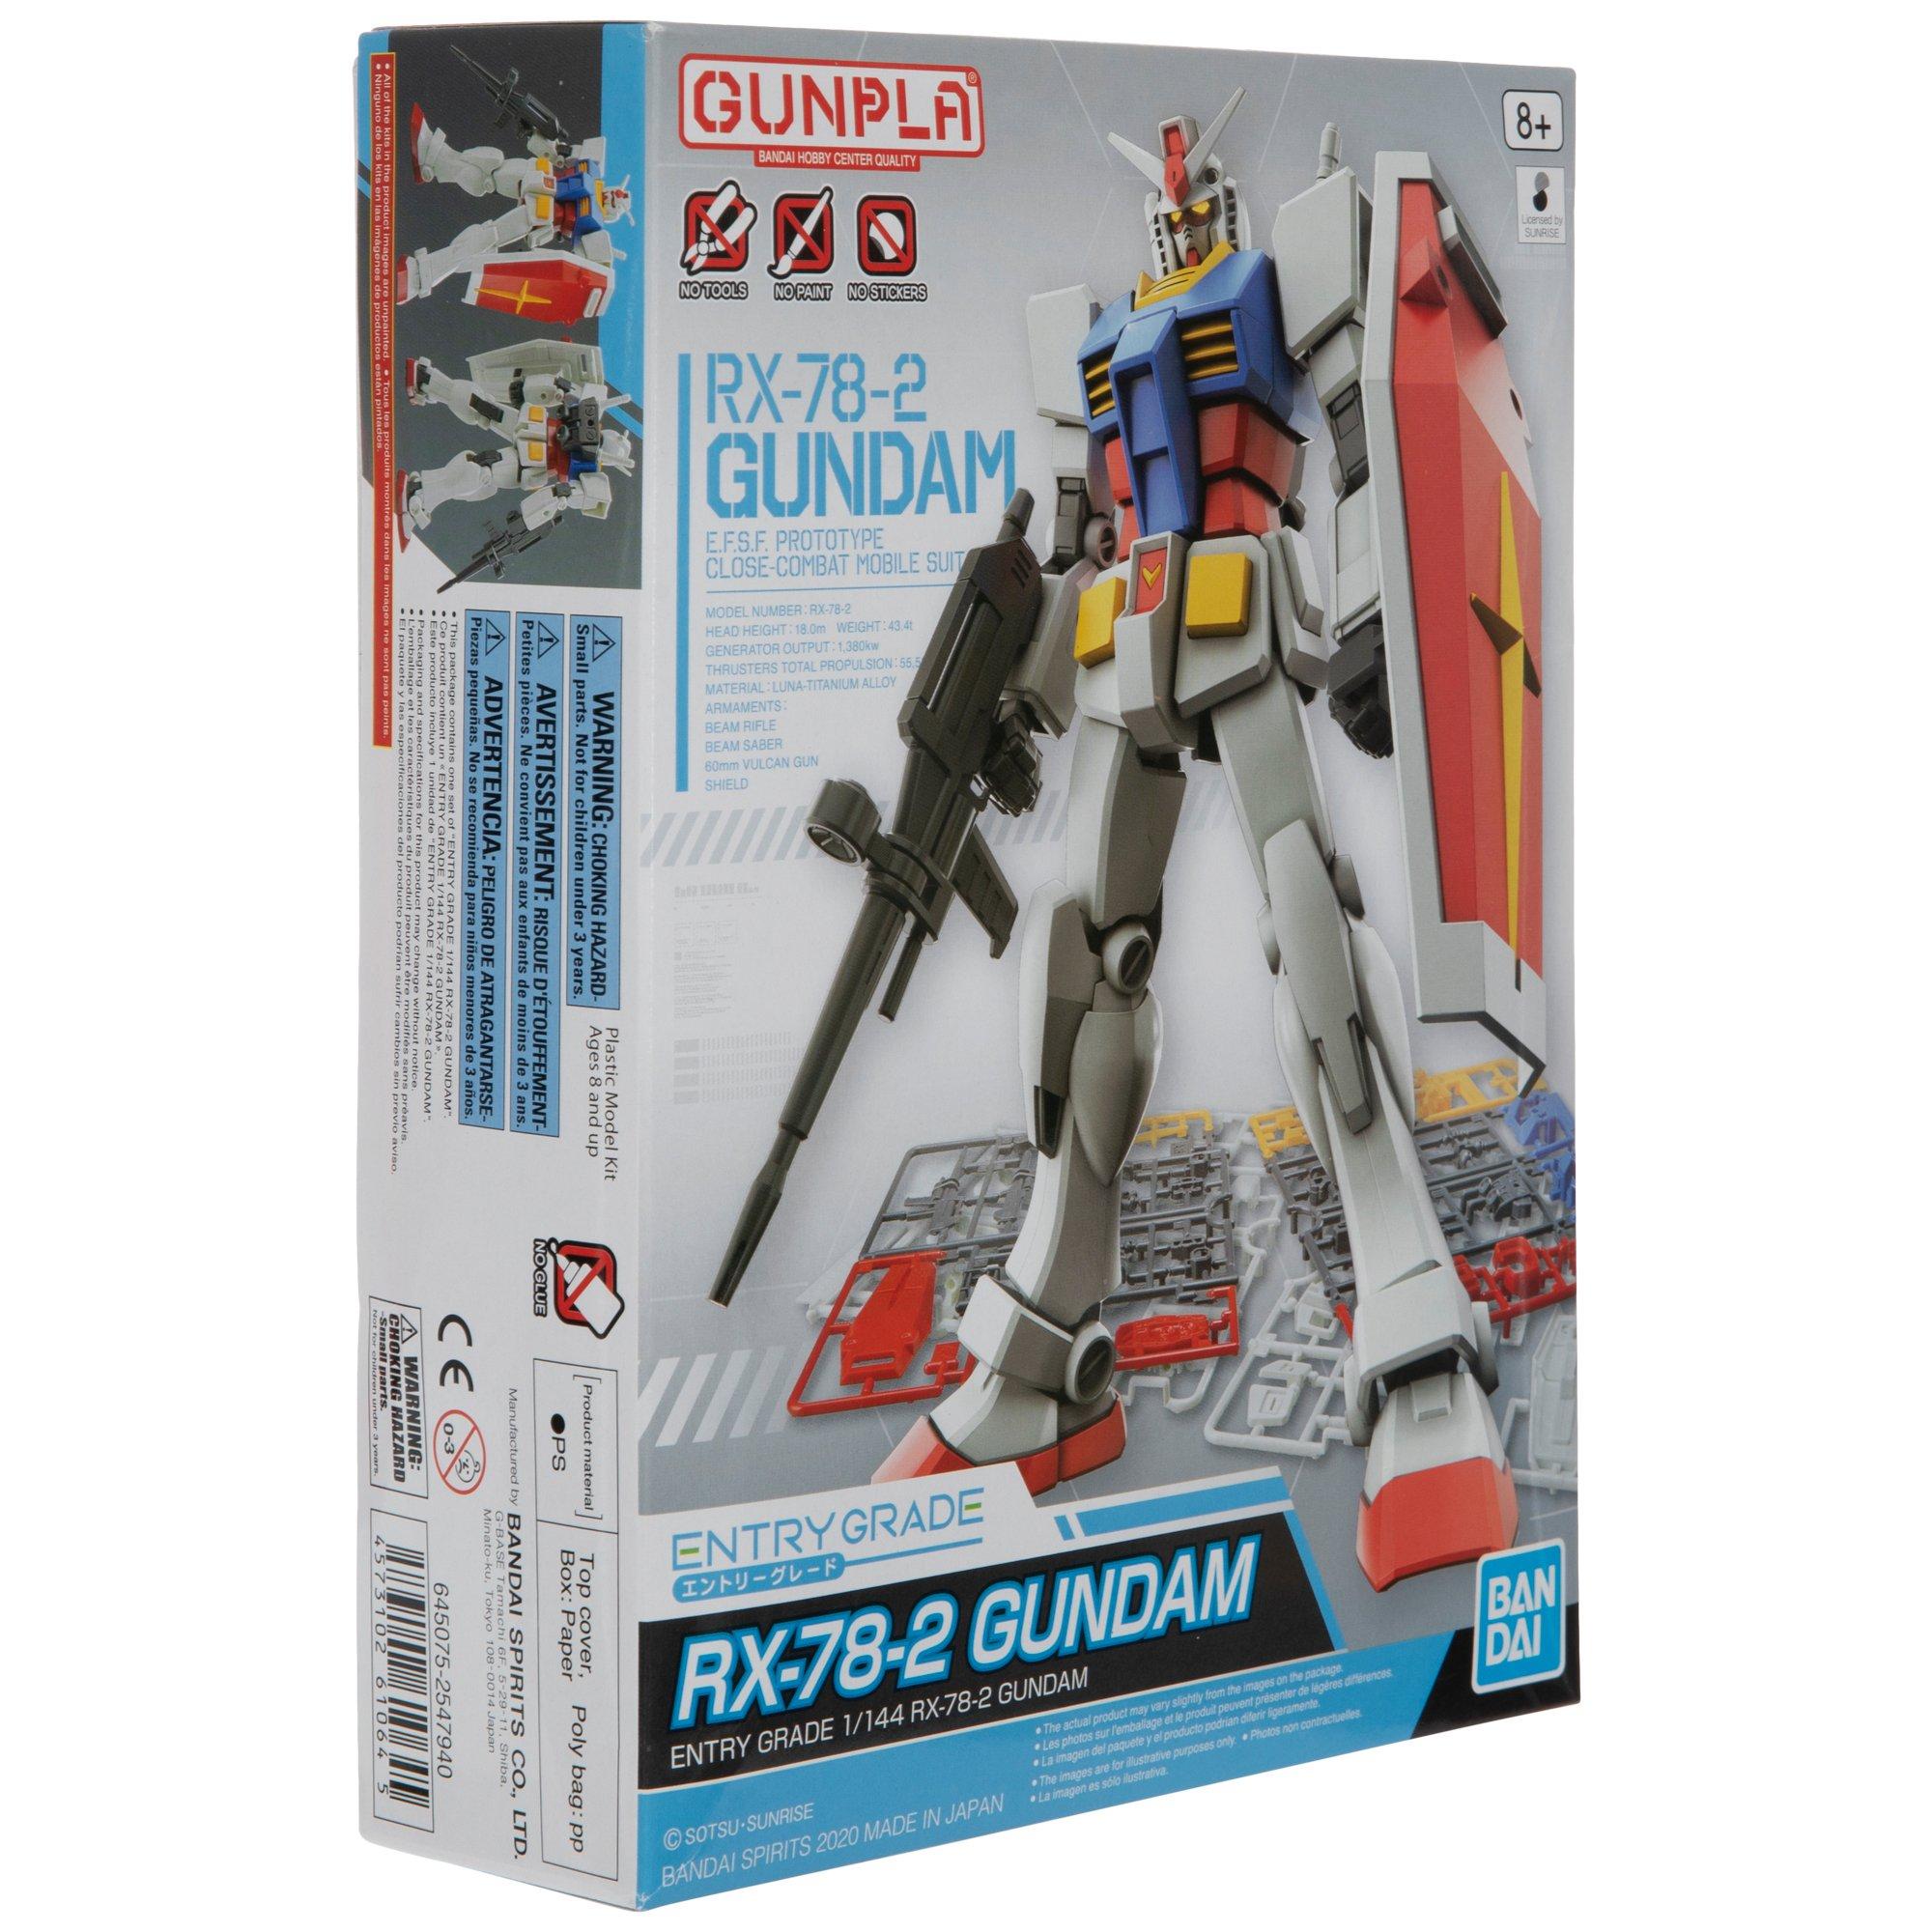  Bandai Hobby RX-78-2 Gundam Mobile Suit Gundam Perfect Grade  Action Figure, Scale 1:60 : Arts, Crafts & Sewing